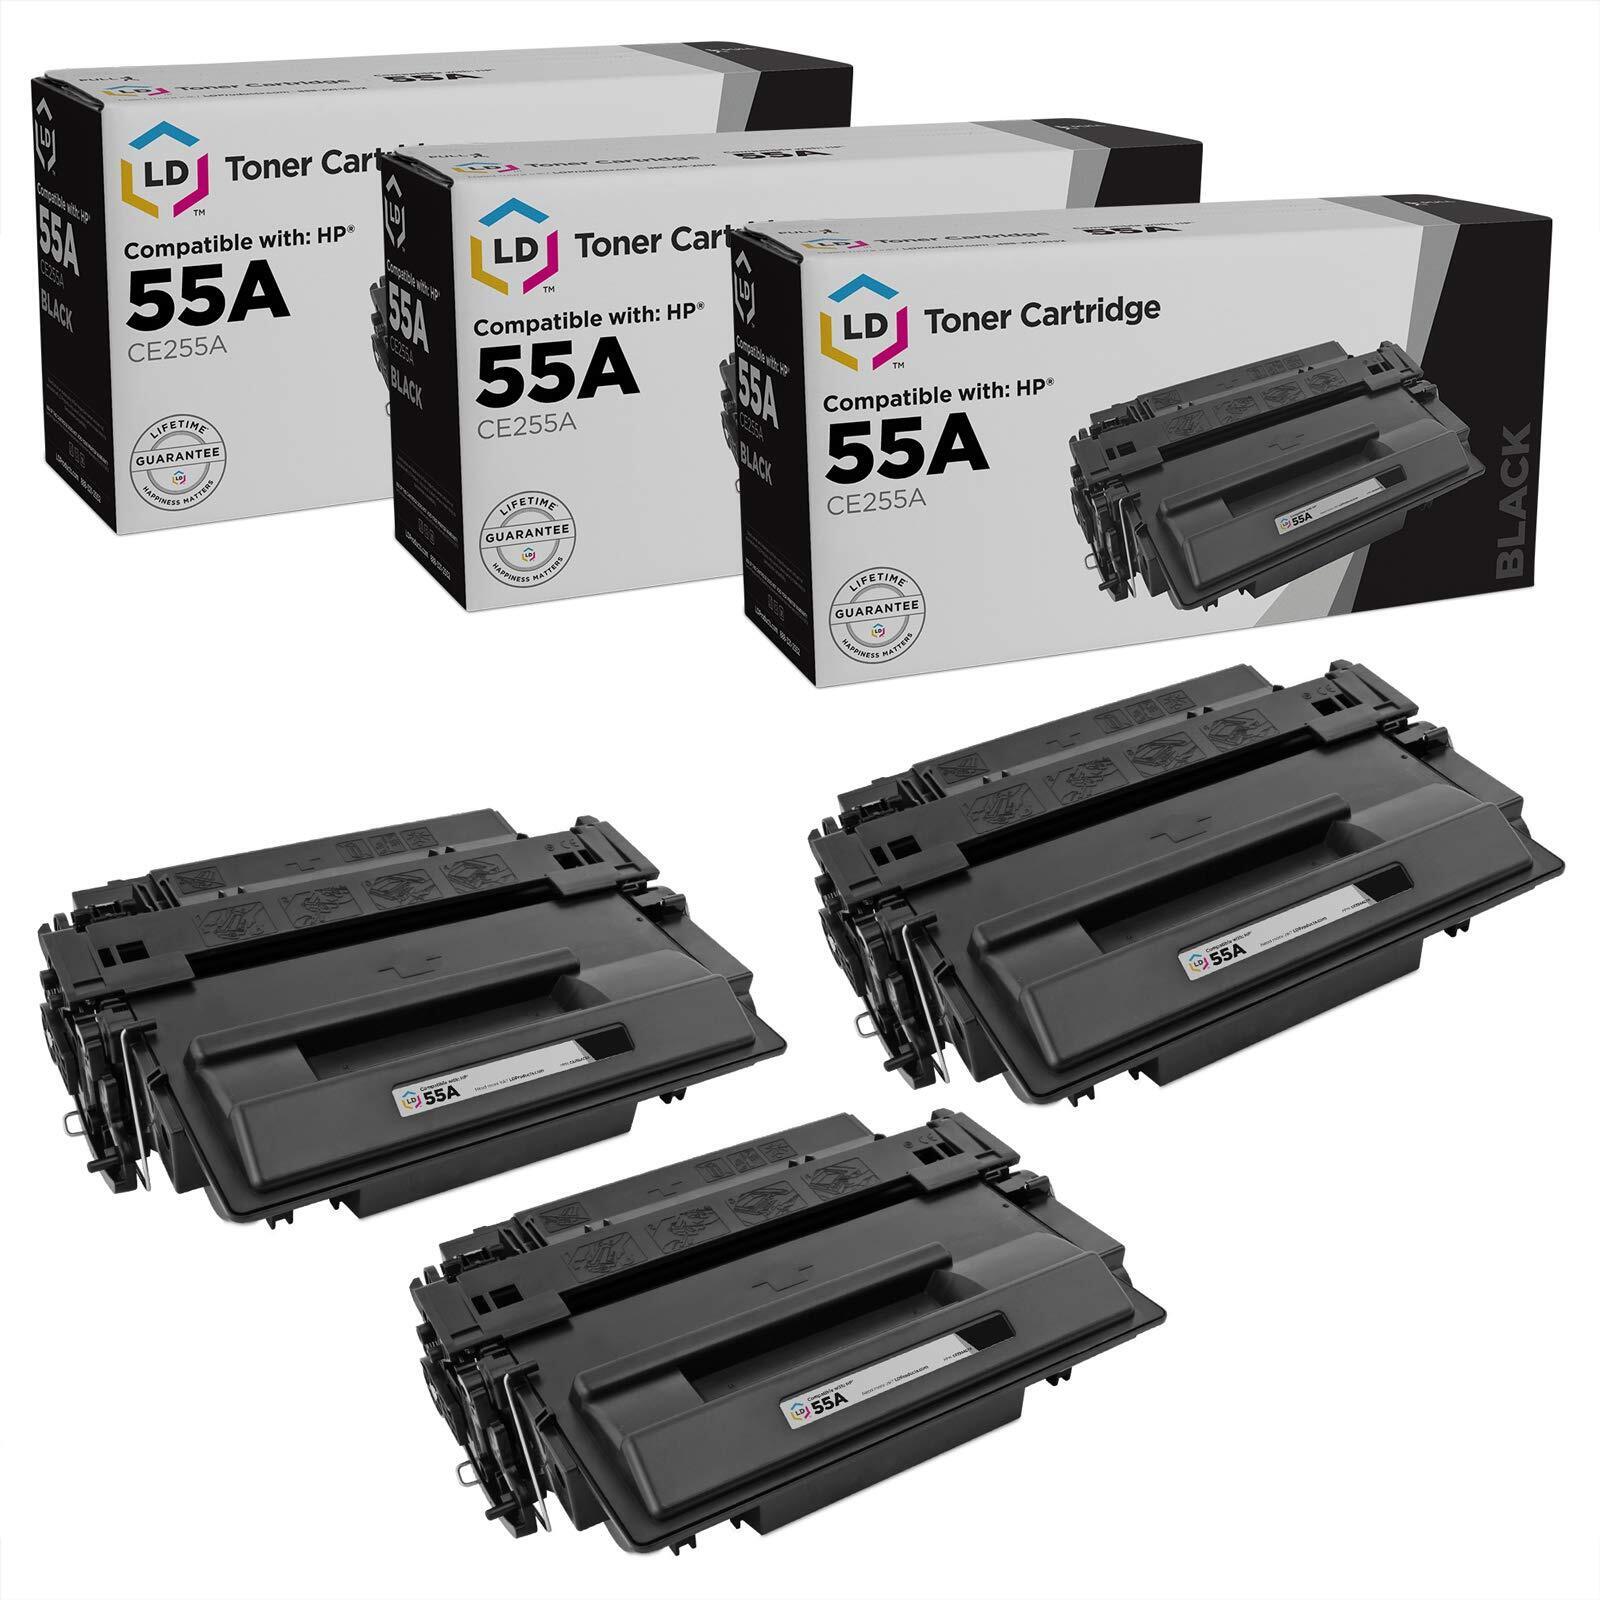 LD Products Replacements for HP 55A 55 CE255A CE255 Toner Cartridge (3PK)